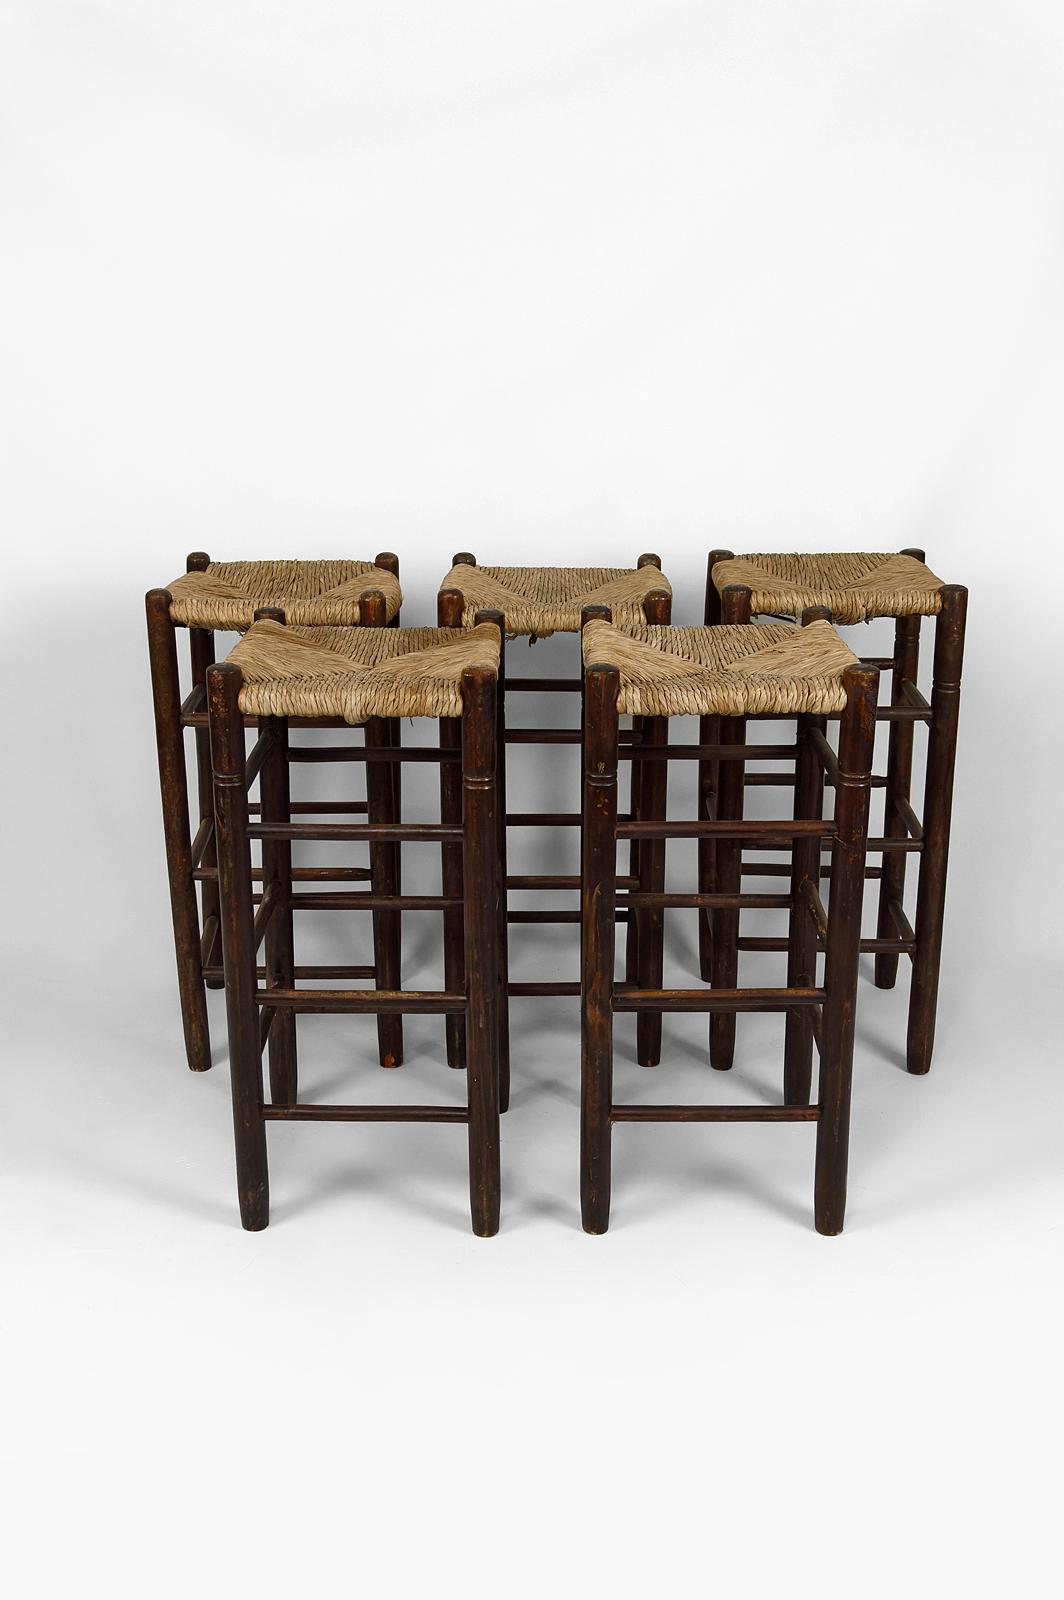 Set of 5 high bar stools.

In the style of Charlotte Perriand, Pierre Faucheux.

Brutalist / midcentury modern style, France, circa 1950.

Straw seats
Beech structure
In used condition.


Dimensions:
height 79 cm
width 36 cm
depth 36 cm.